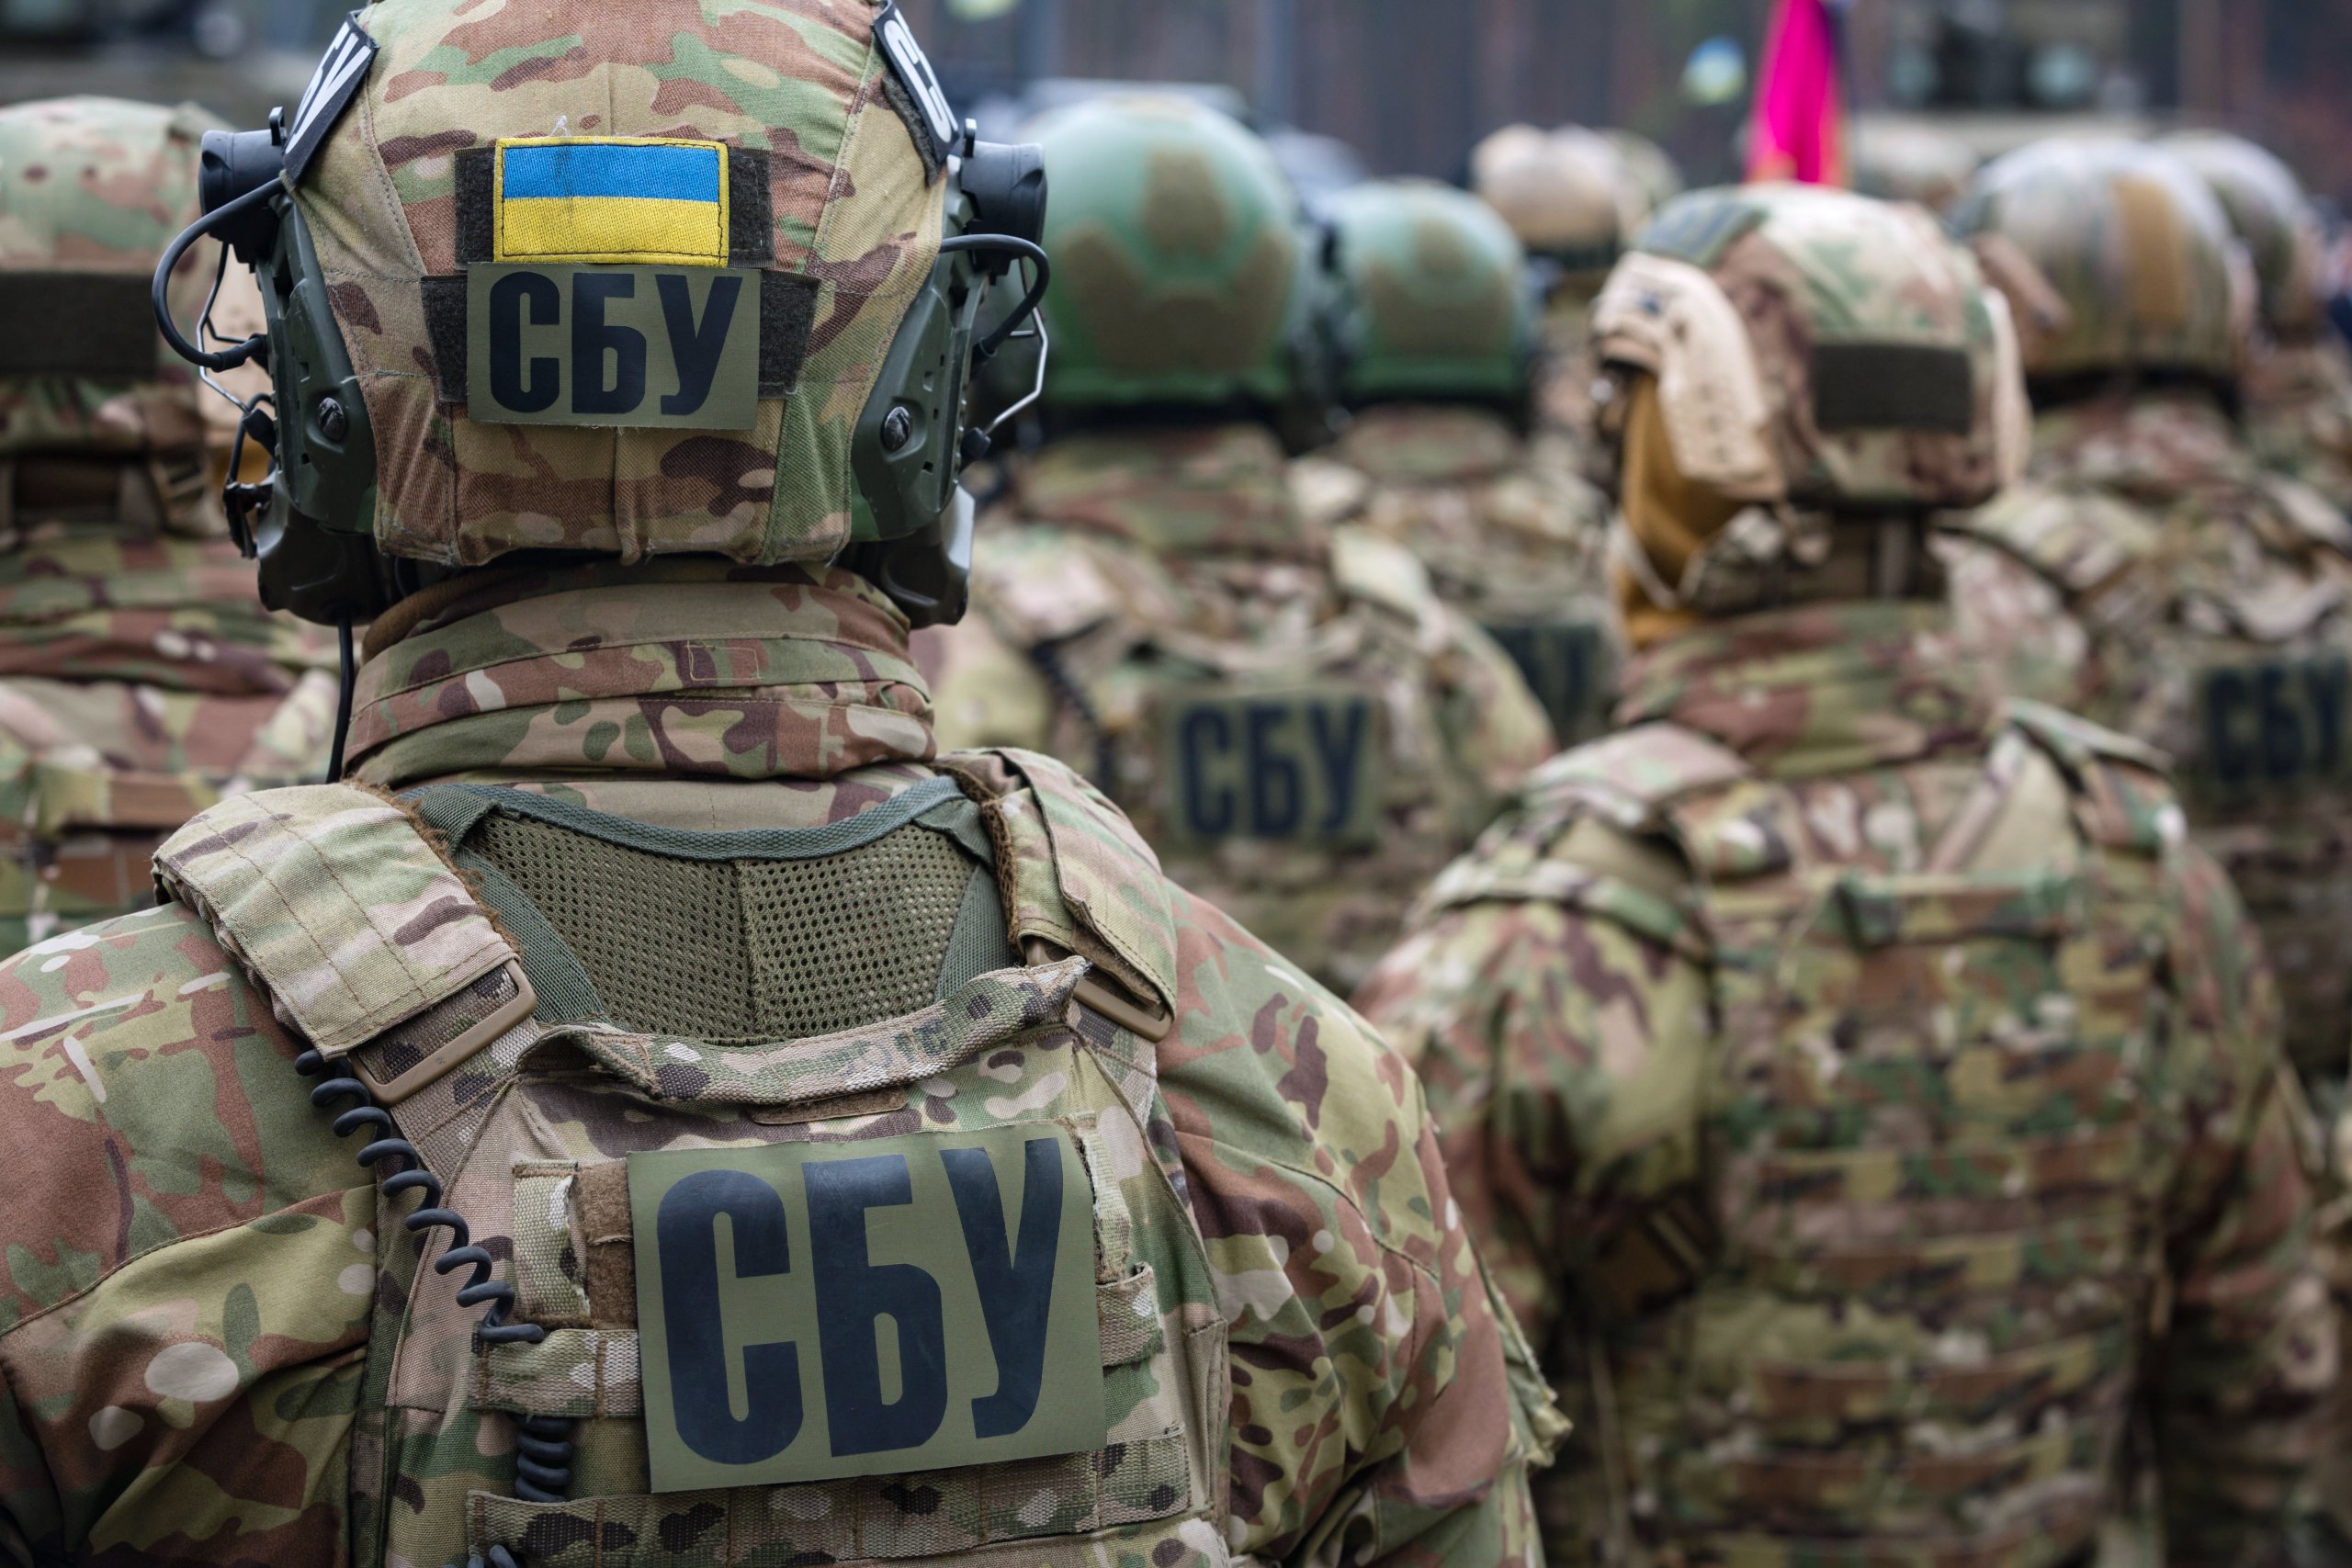 The SSU has detained former FSB agents which were planning attacks on the railway infrastructure in the Odessa region